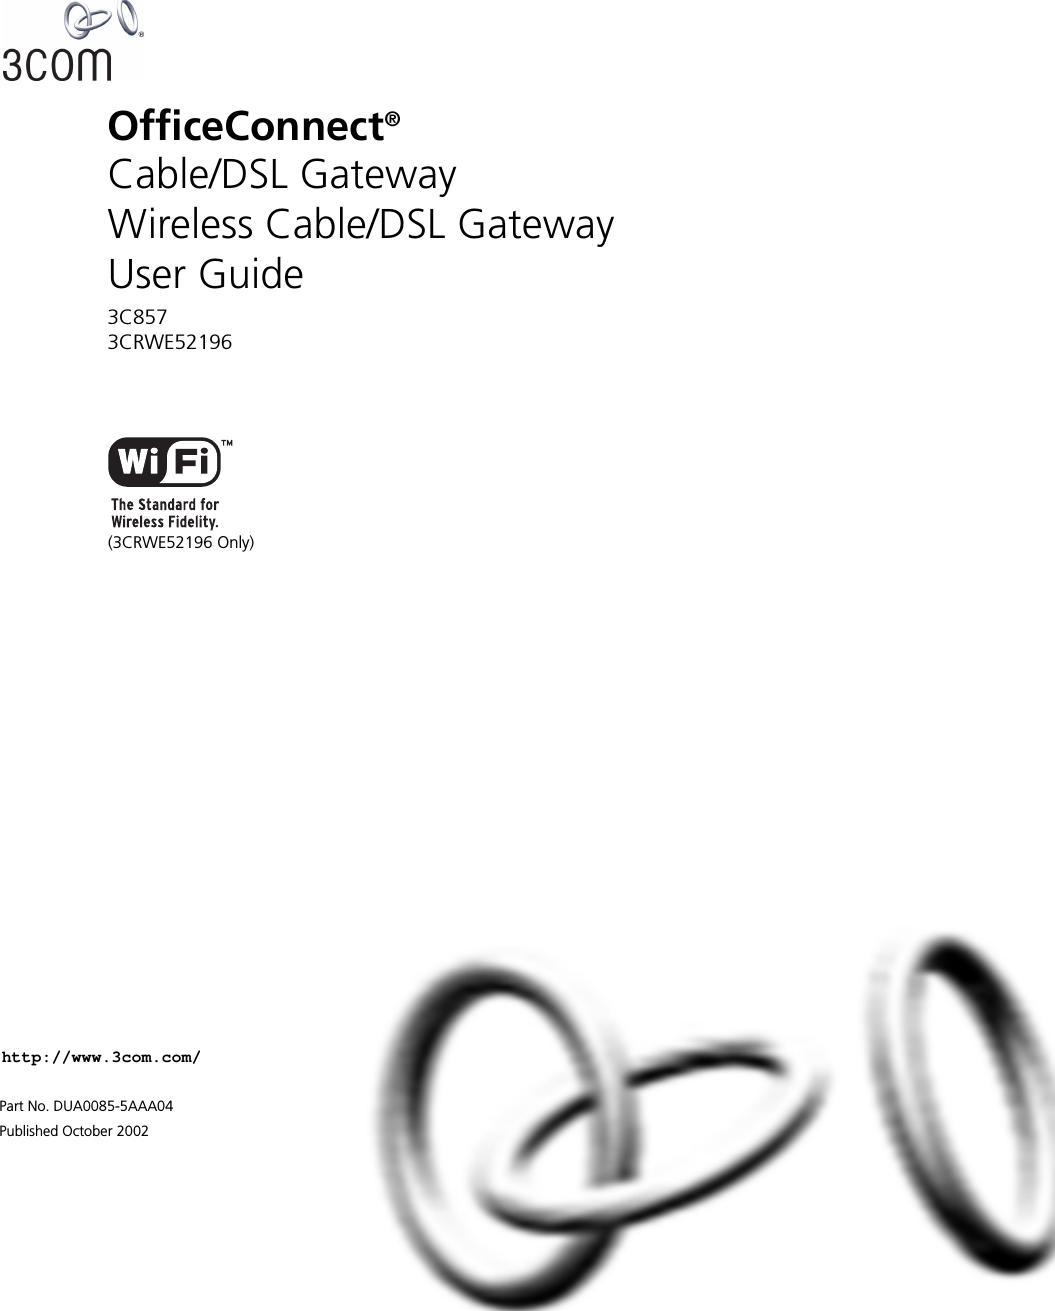 http://www.3com.com/Part No. DUA0085-5AAA04Published October 2002OfficeConnect® Cable/DSL GatewayWireless Cable/DSL GatewayUser Guide3C8573CRWE52196(3CRWE52196 Only)